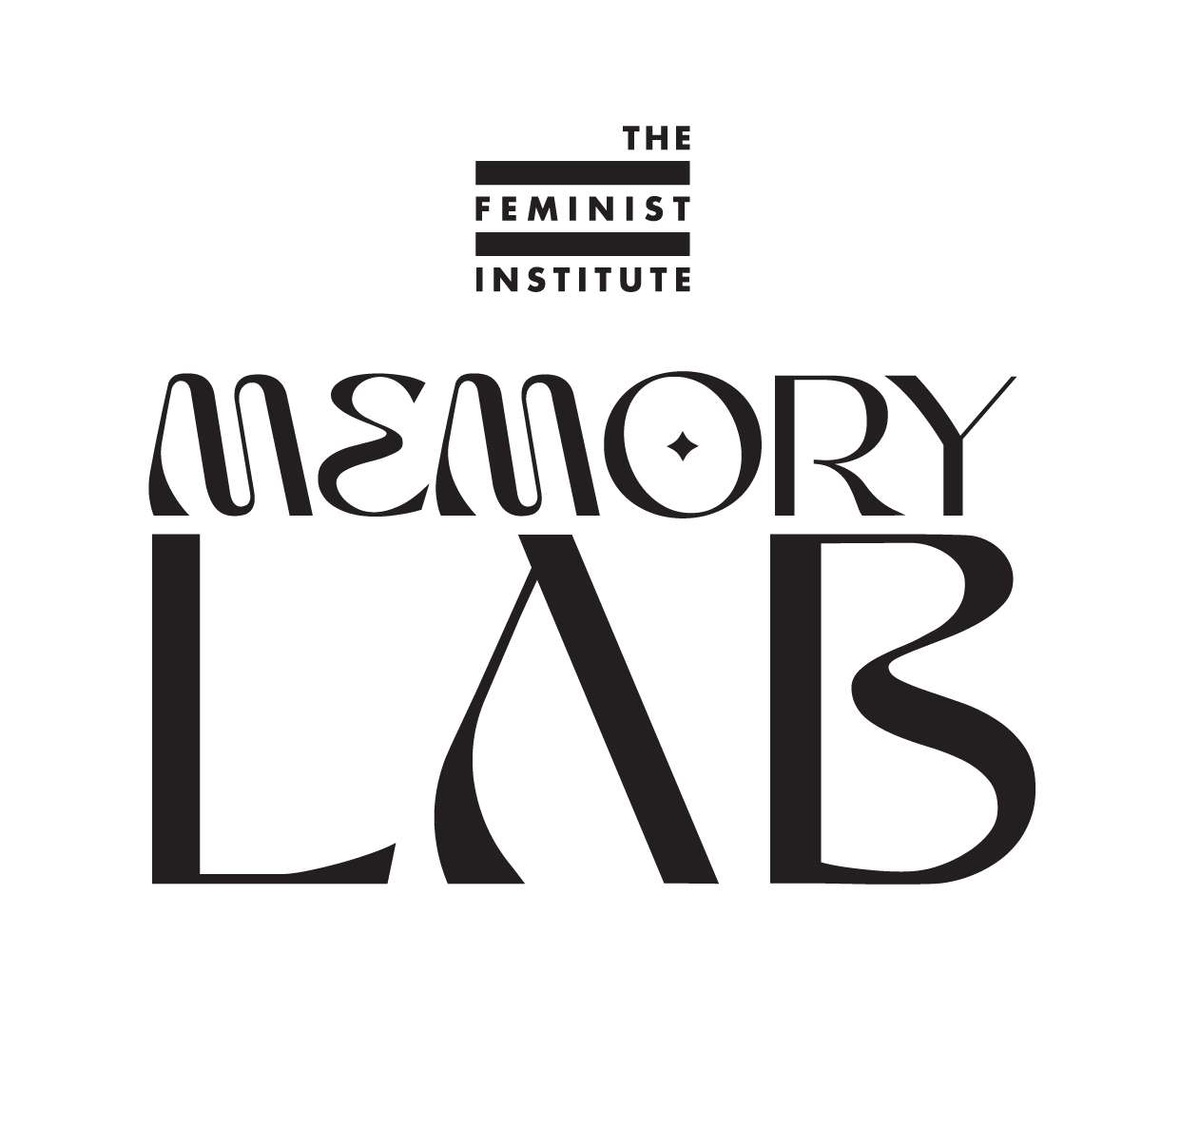 Text logo featuring The Feminist Institute logo and the words "memory lab" in a funky font